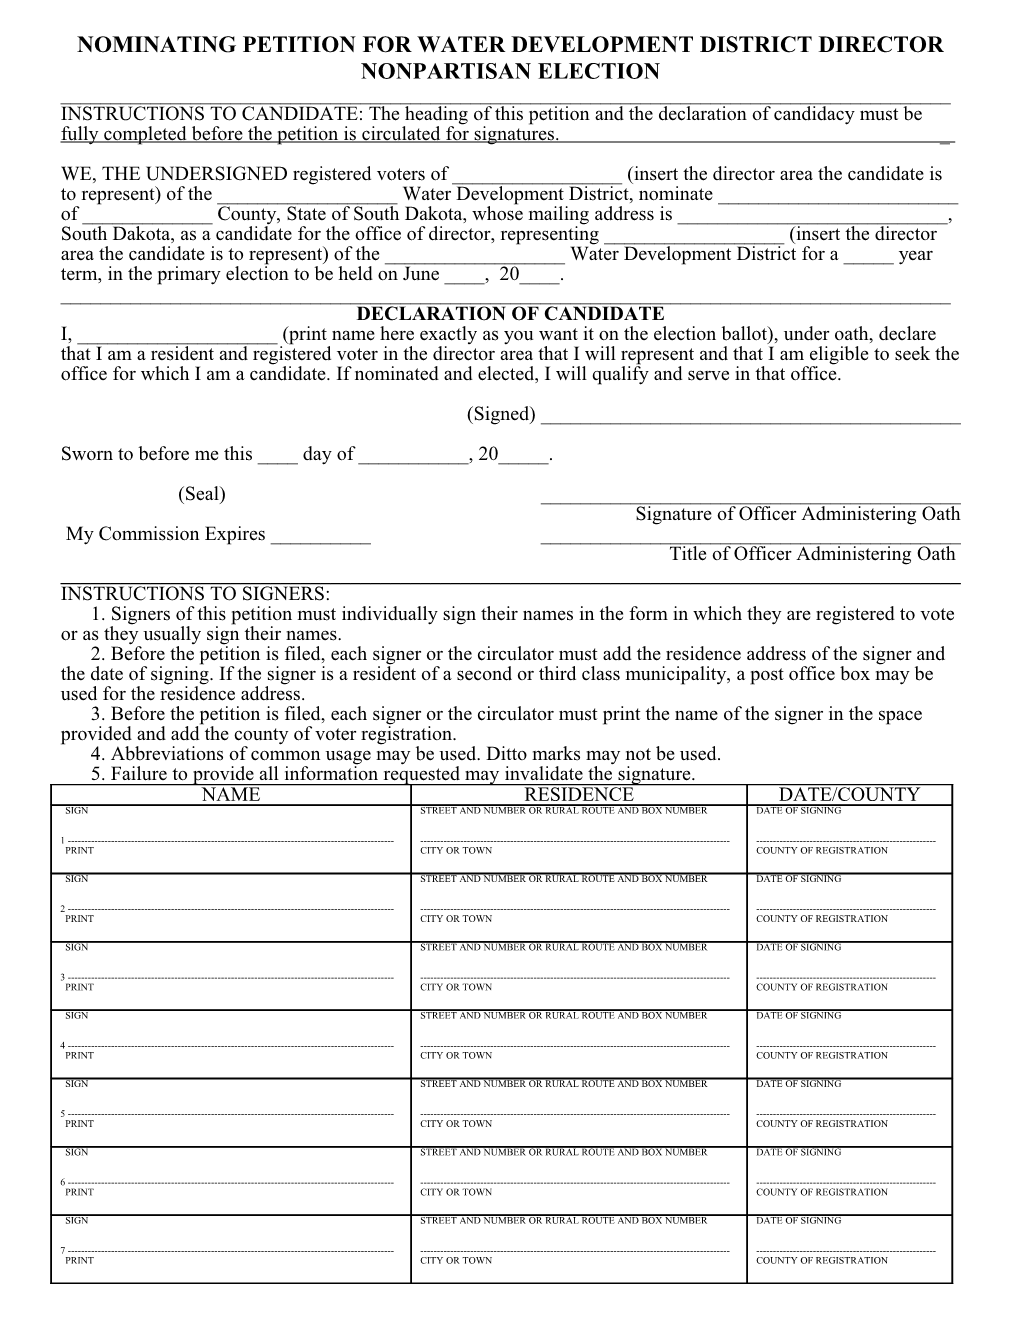 Nominating Petition for Water Development District Director Nonpartisan Election